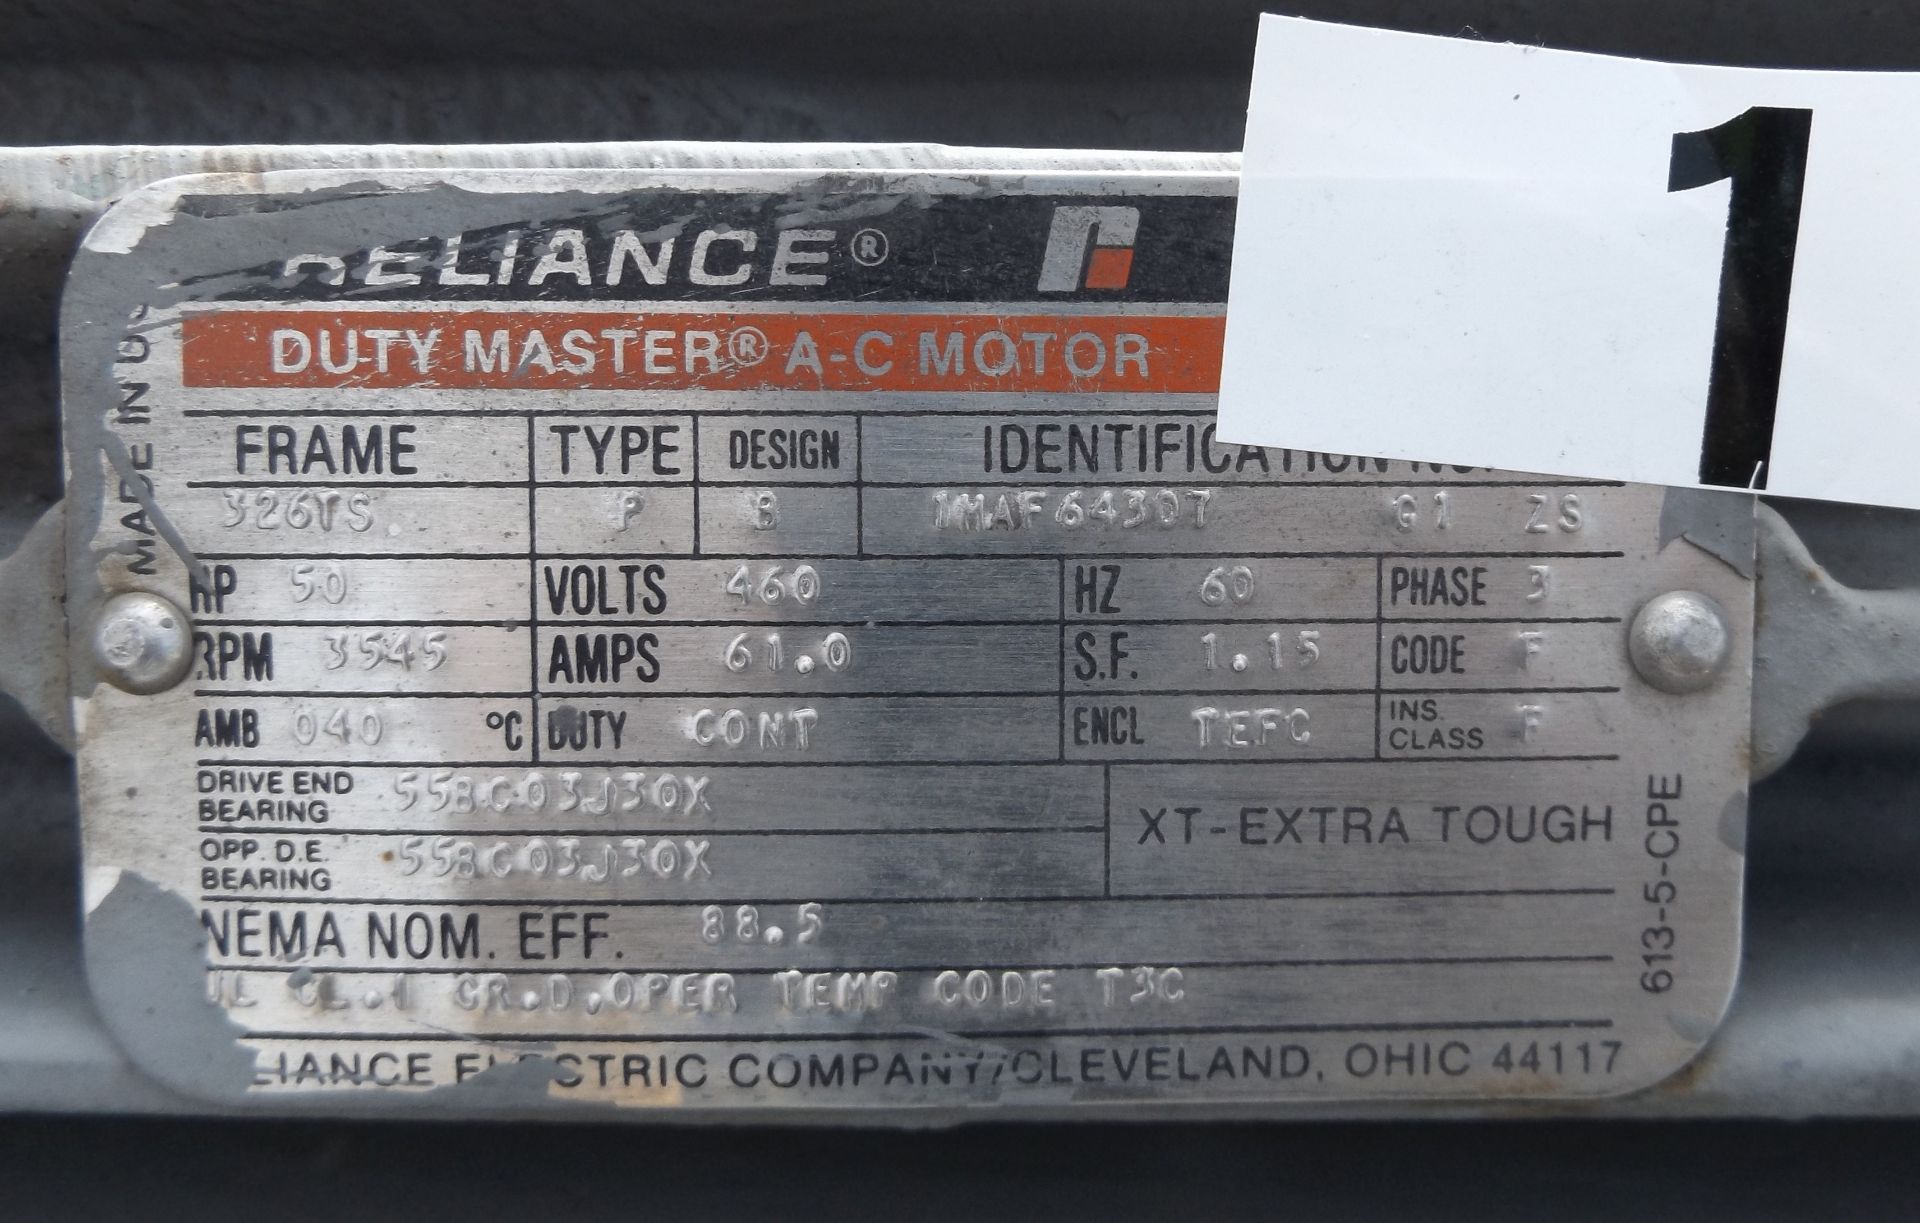 Reliance 50HP, 326TS, 3545 RPM, 460 VOLT, 60 Hz 3 PHASE, TEFC ENCL - Image 2 of 2